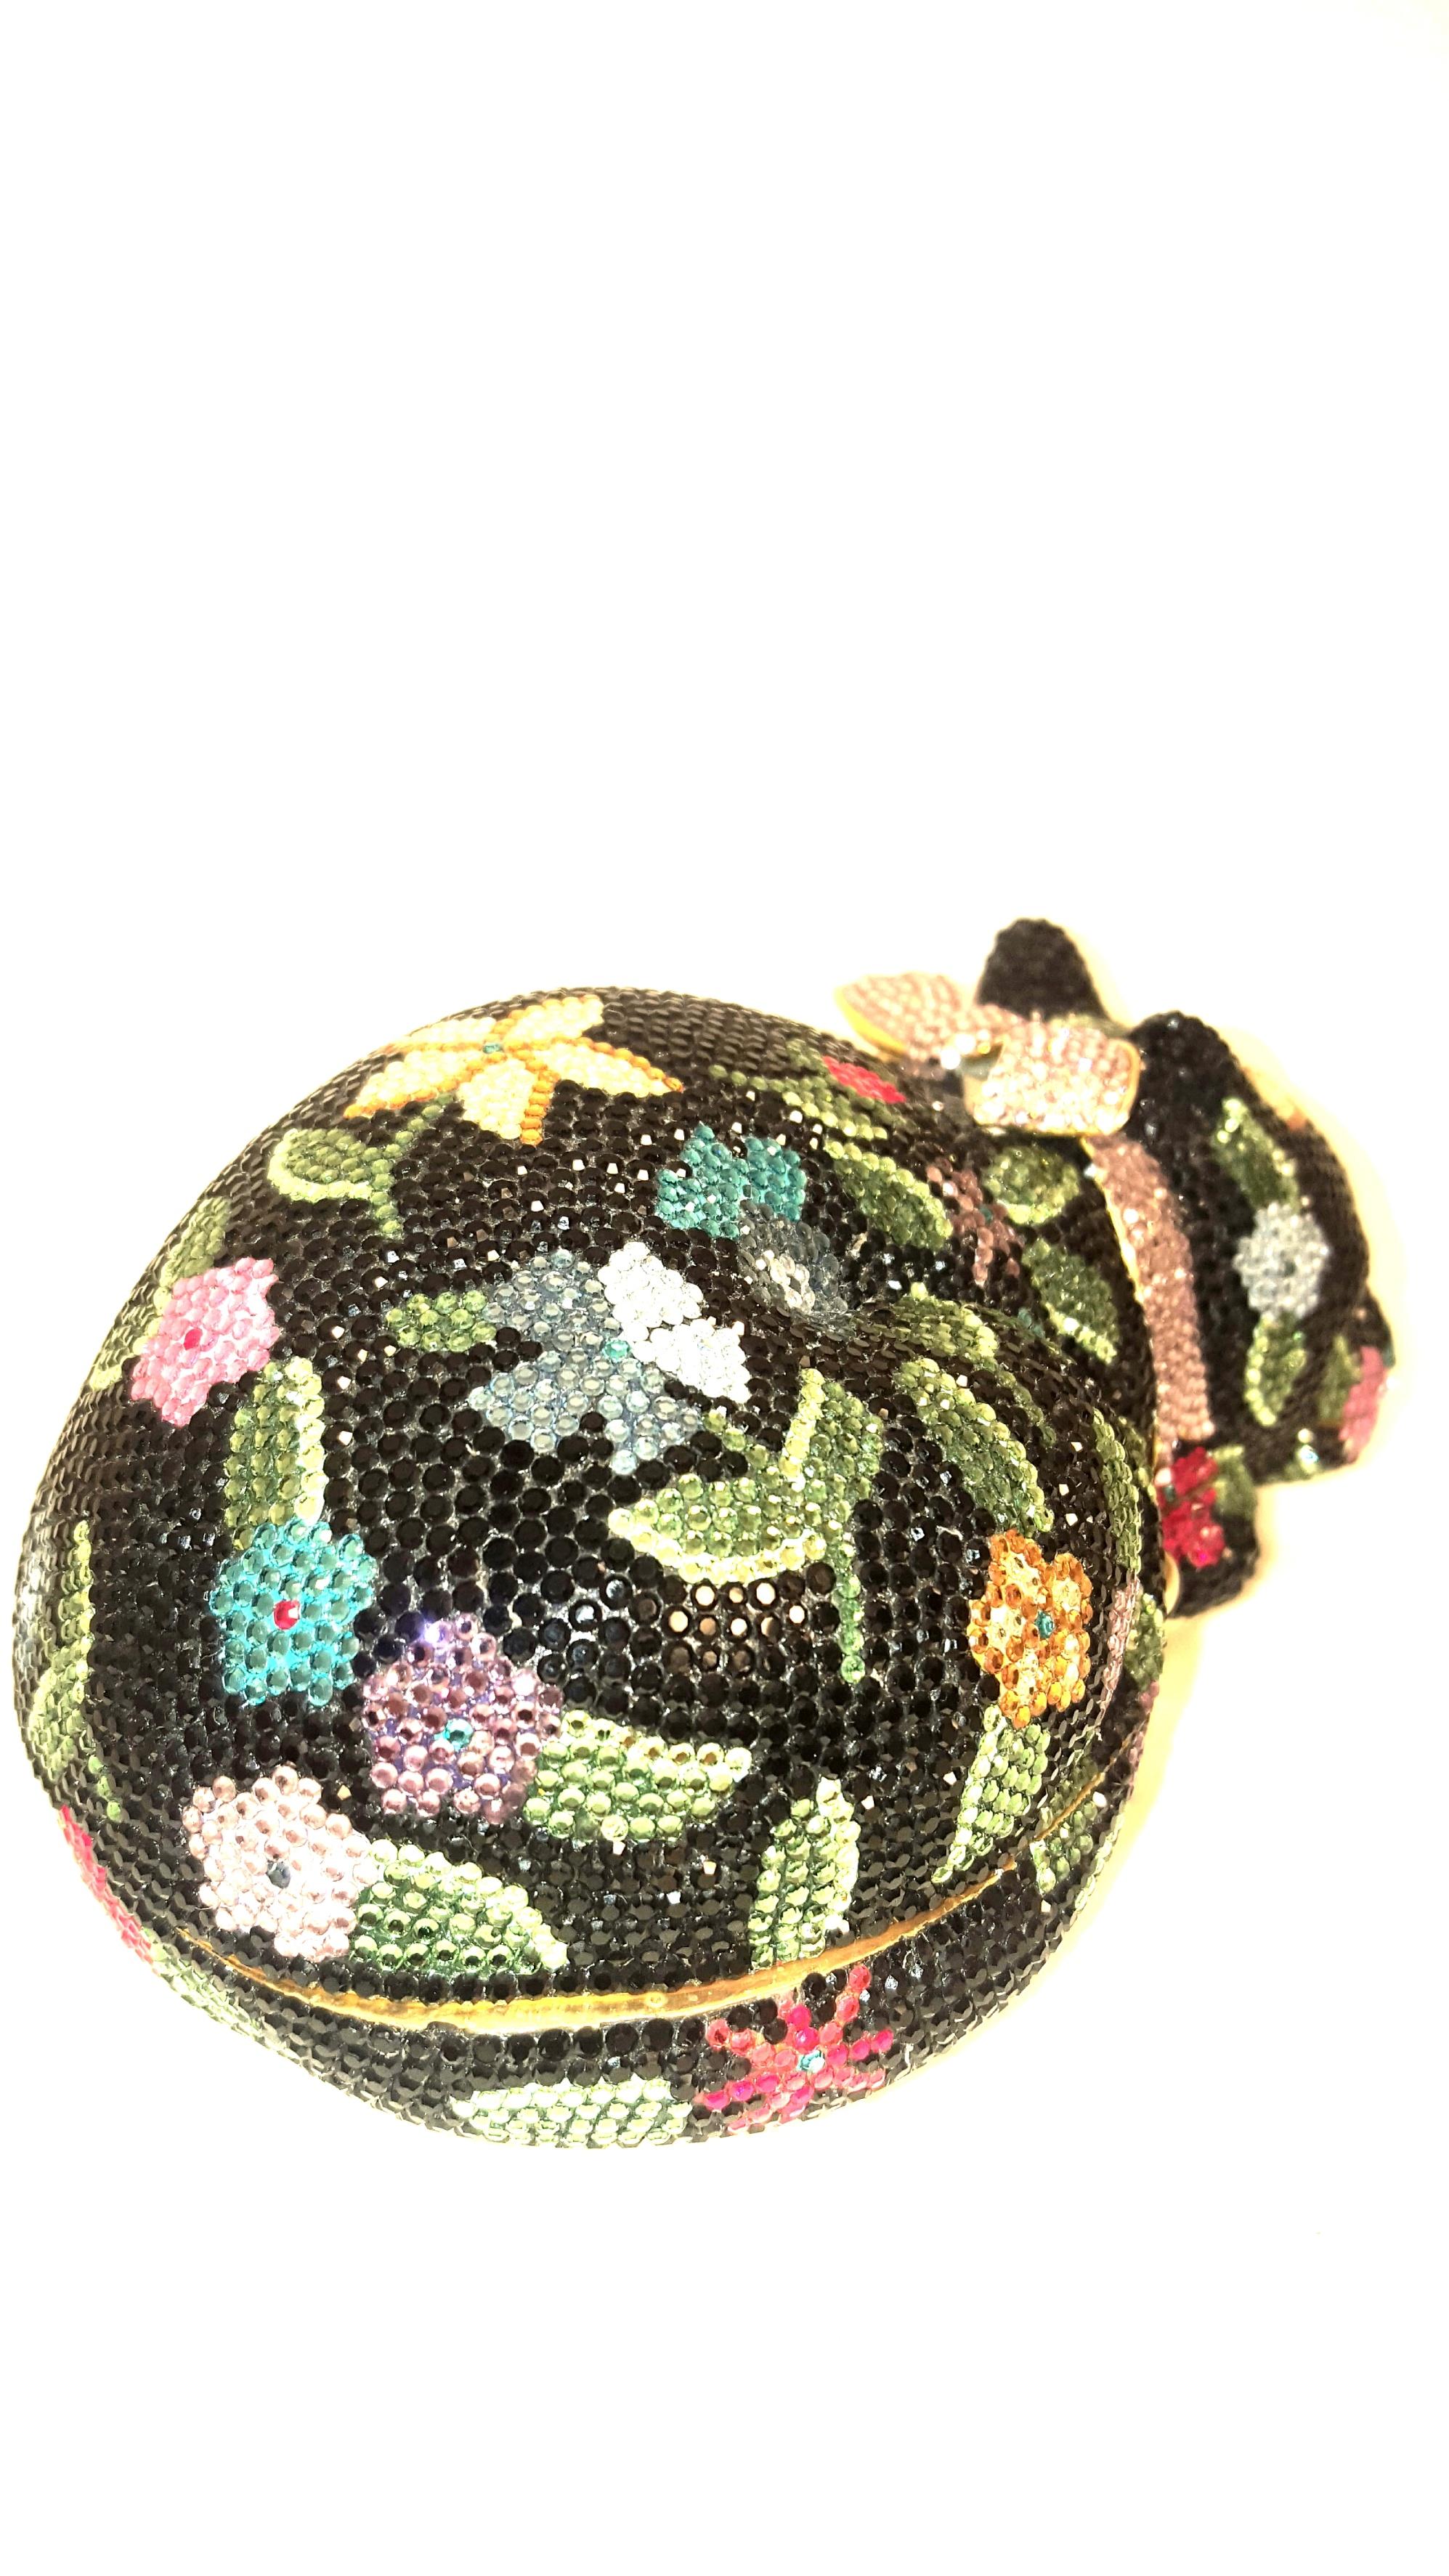 Judith Leiber minaudière features the form of a bejeweled sleeping cat with a bow around its neck. The hard clutch is covered all over with mini Swarovski crystals with black background and multi flowers floating around in shades of yellow, red,